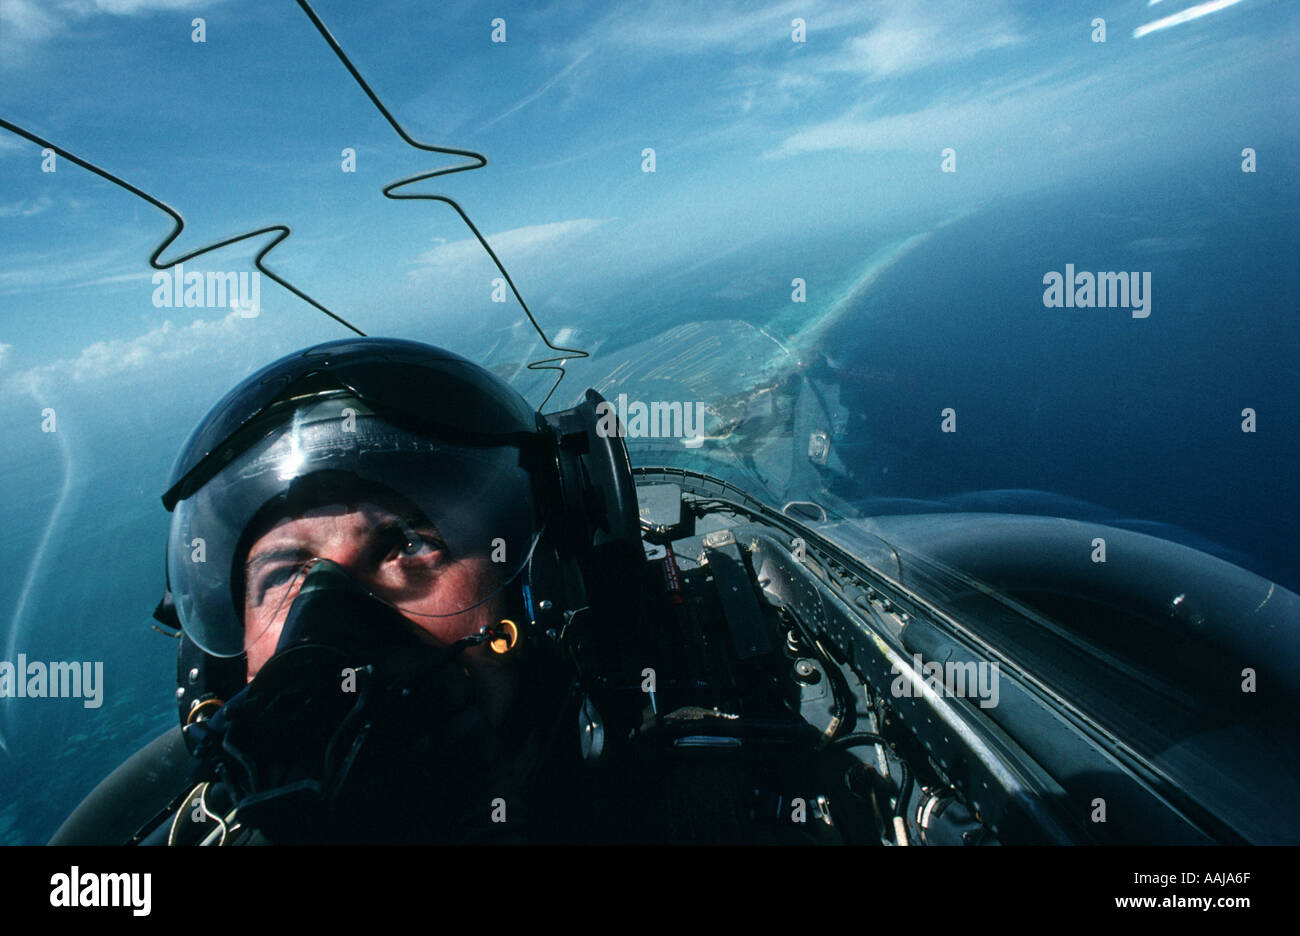 Harrier pilot in the aircraft cockpit Stock Photo